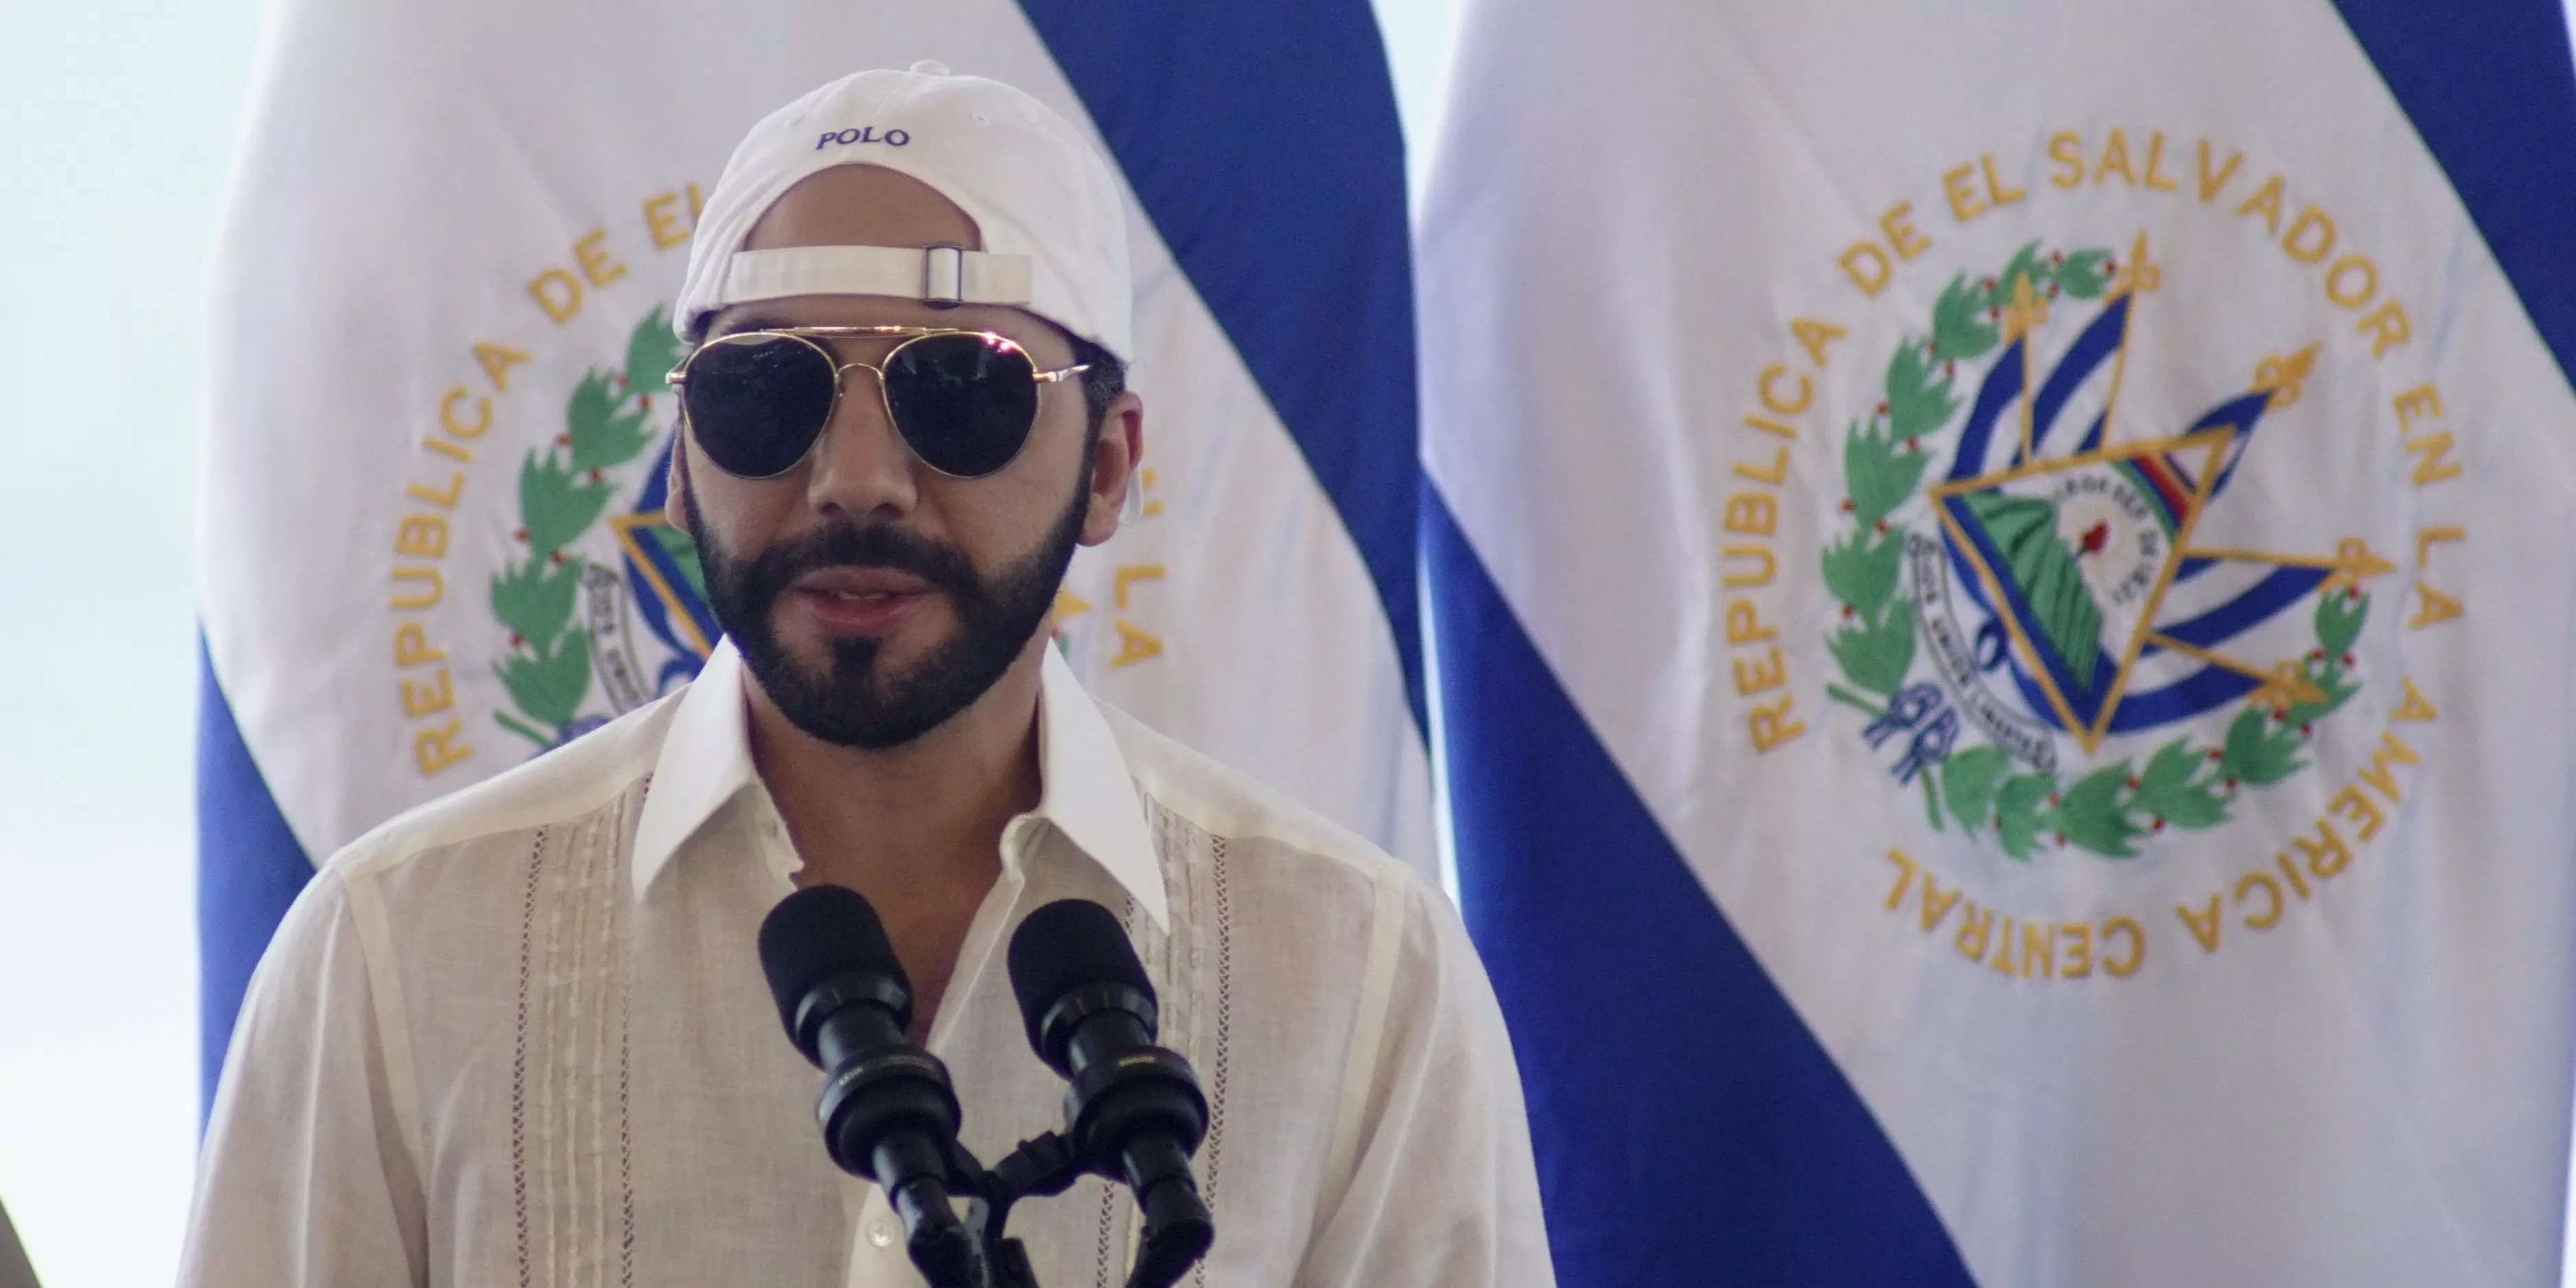 
El Salvador's crypto-loving president says bitcoin is going to $100,000 this year and predicts 2 more countries will adopt it as legal tender
